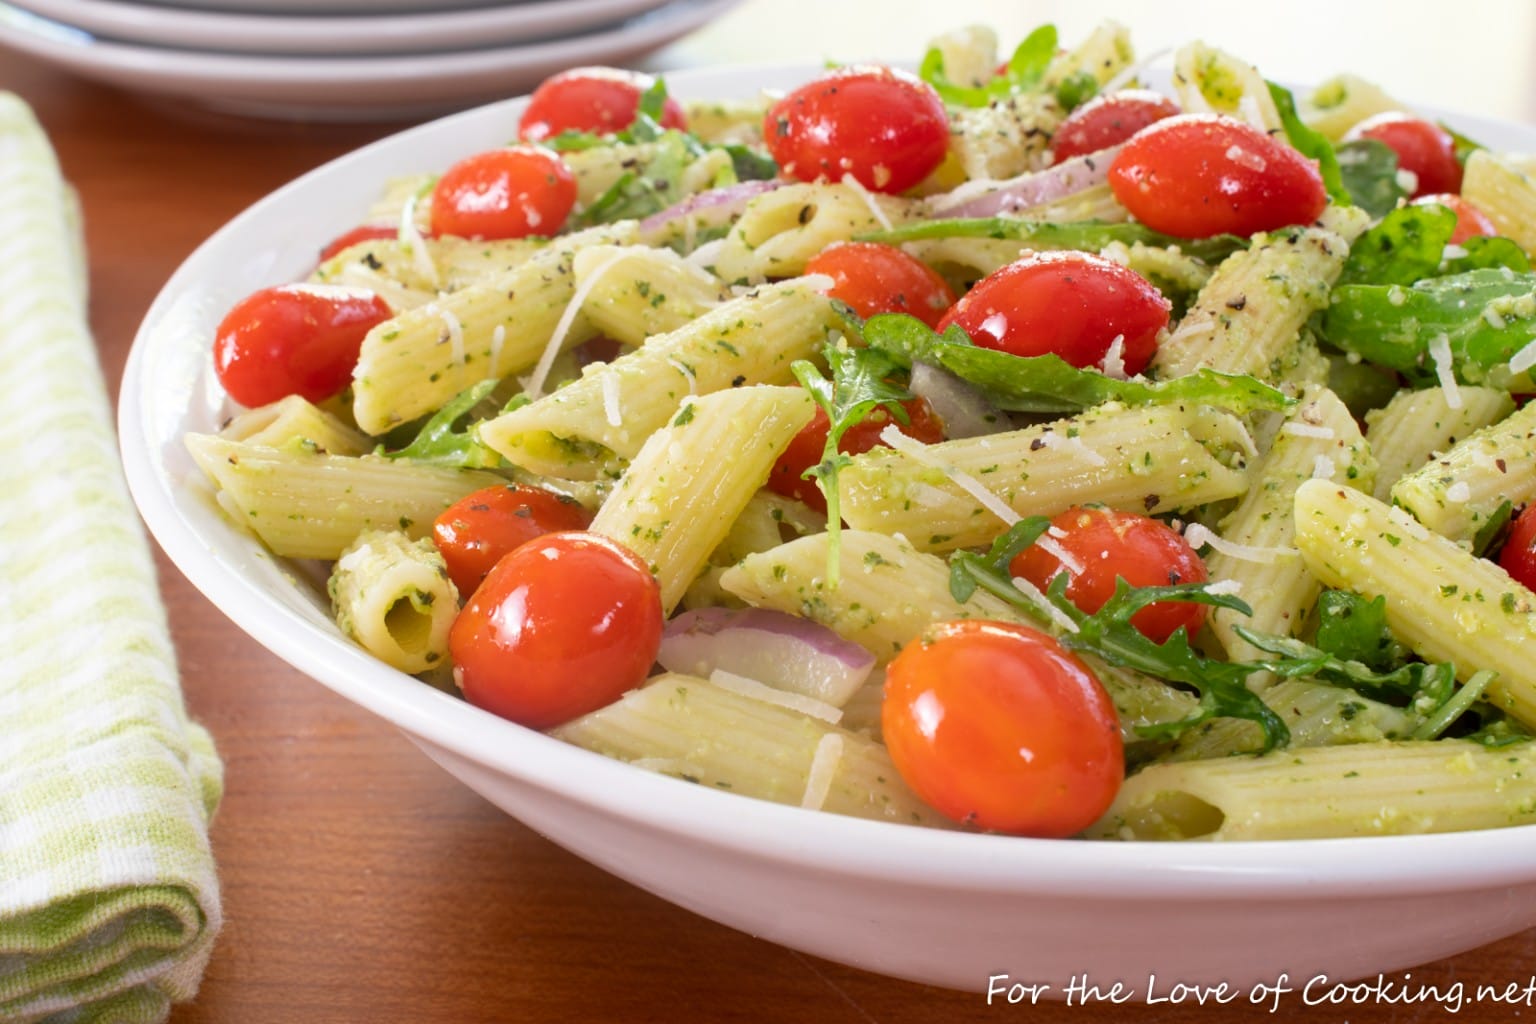 Pasta Salad with Blistered Tomatoes, Arugula, and Pesto | For the Love ...